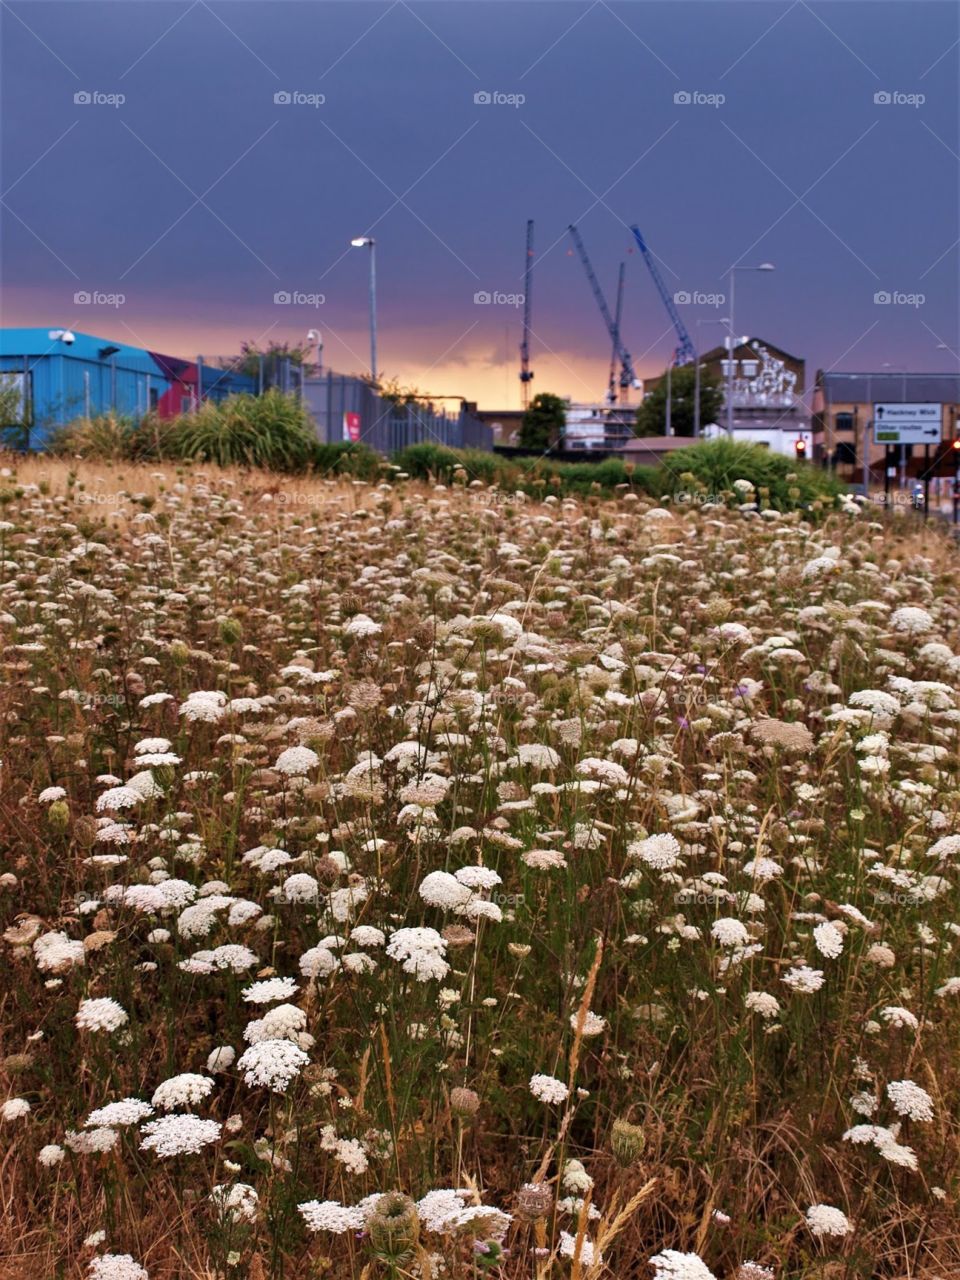 Purple storm clouds frame the sunset over wildflower meadows in Hackney Wick 